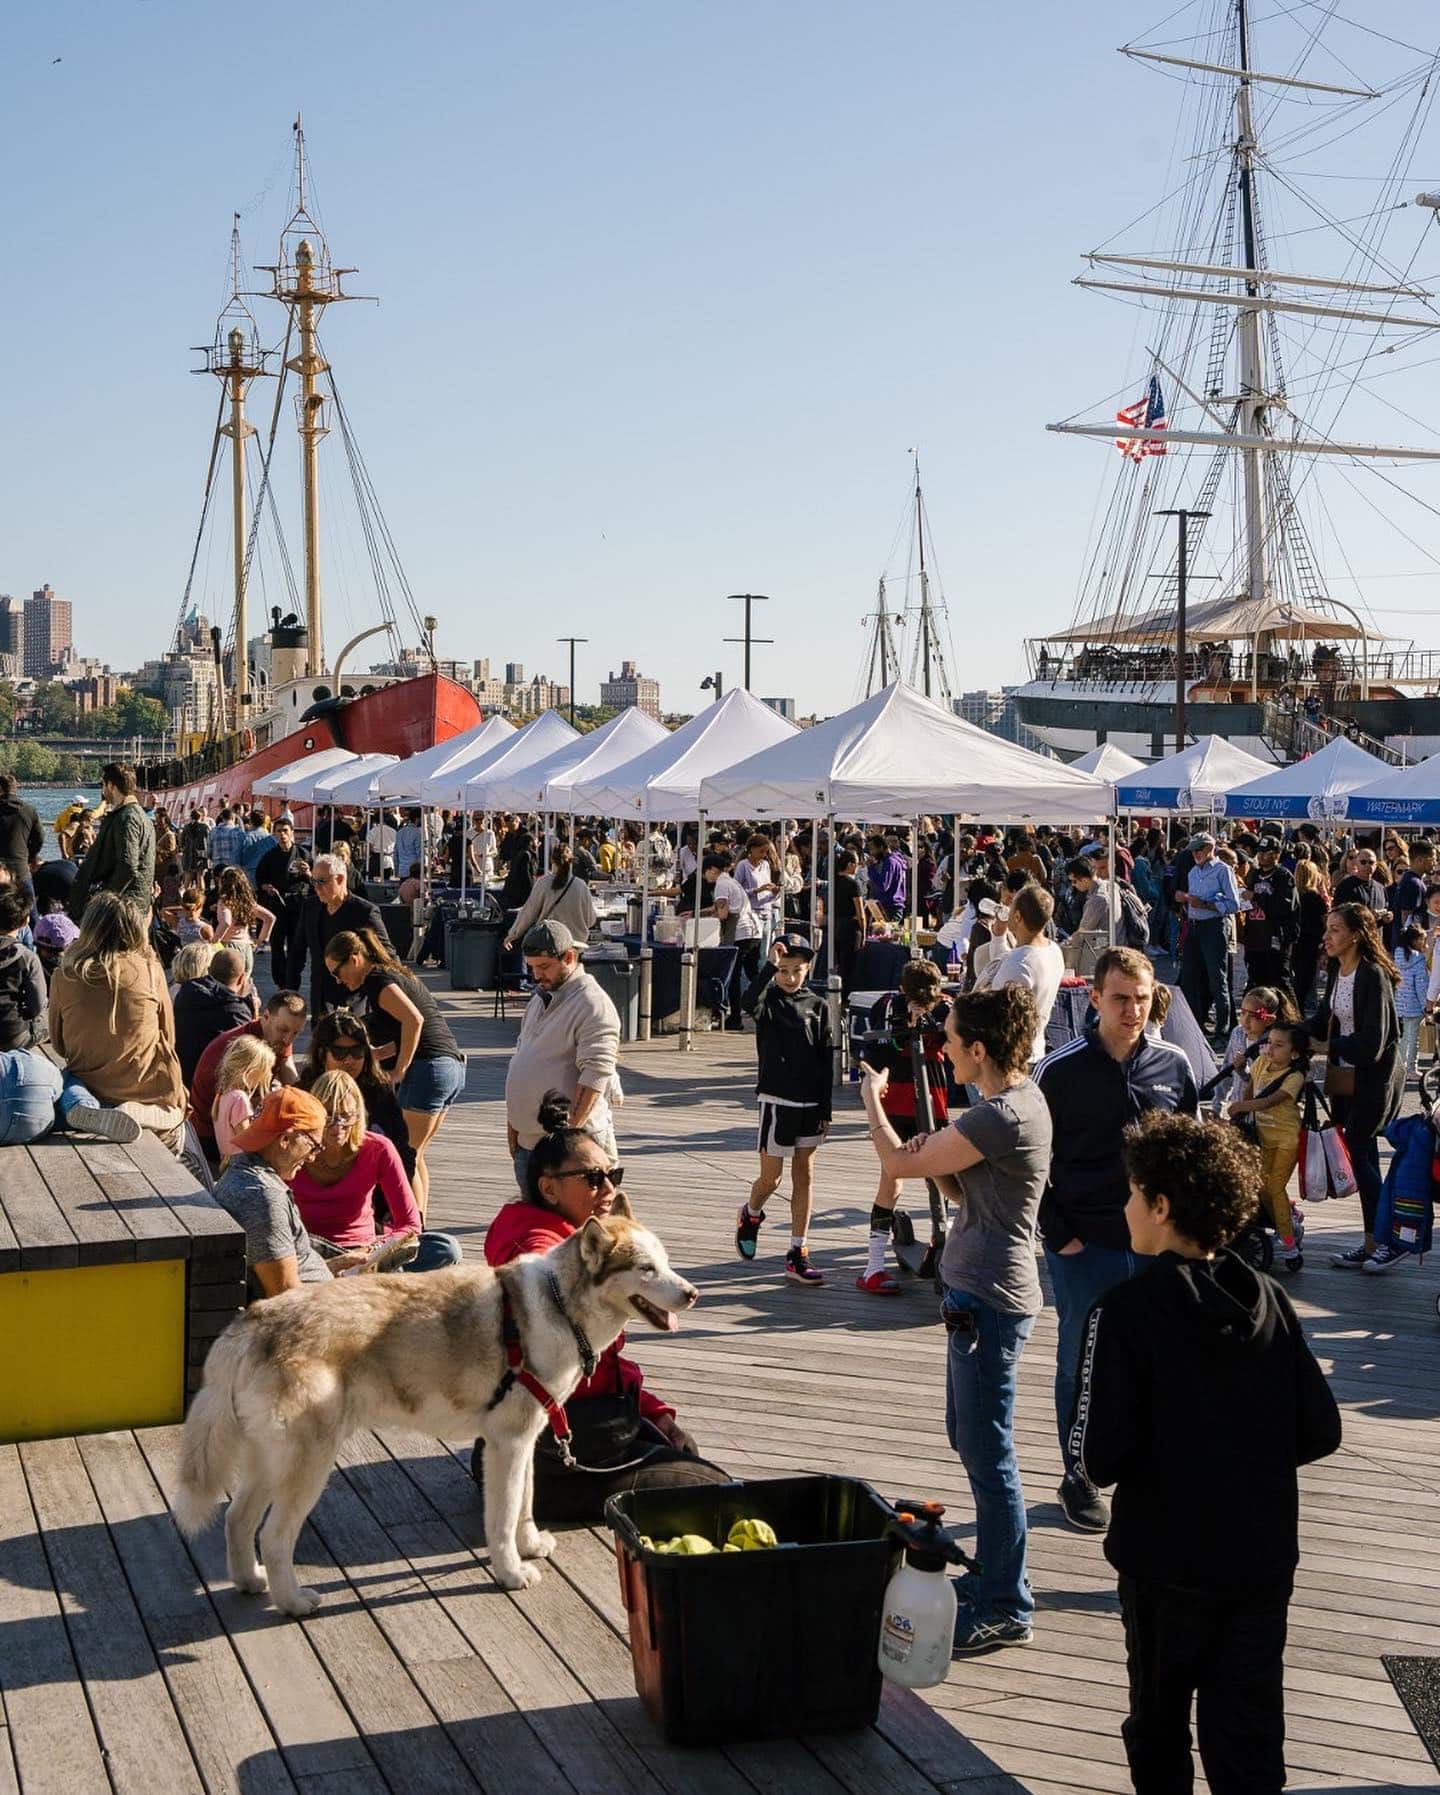 Food. Community. Education. Fundraising for local schools. Taste of The Seaport is back this September. More than 50 restaurants and community partners will come together to showcase the culinary diversity of lower Manhattan and support the area’s local schools. Save the date ↴ 🗓️Sat, 9/23  612-4pm Seaport Square Details ➤ link in bio. #TheSeaport